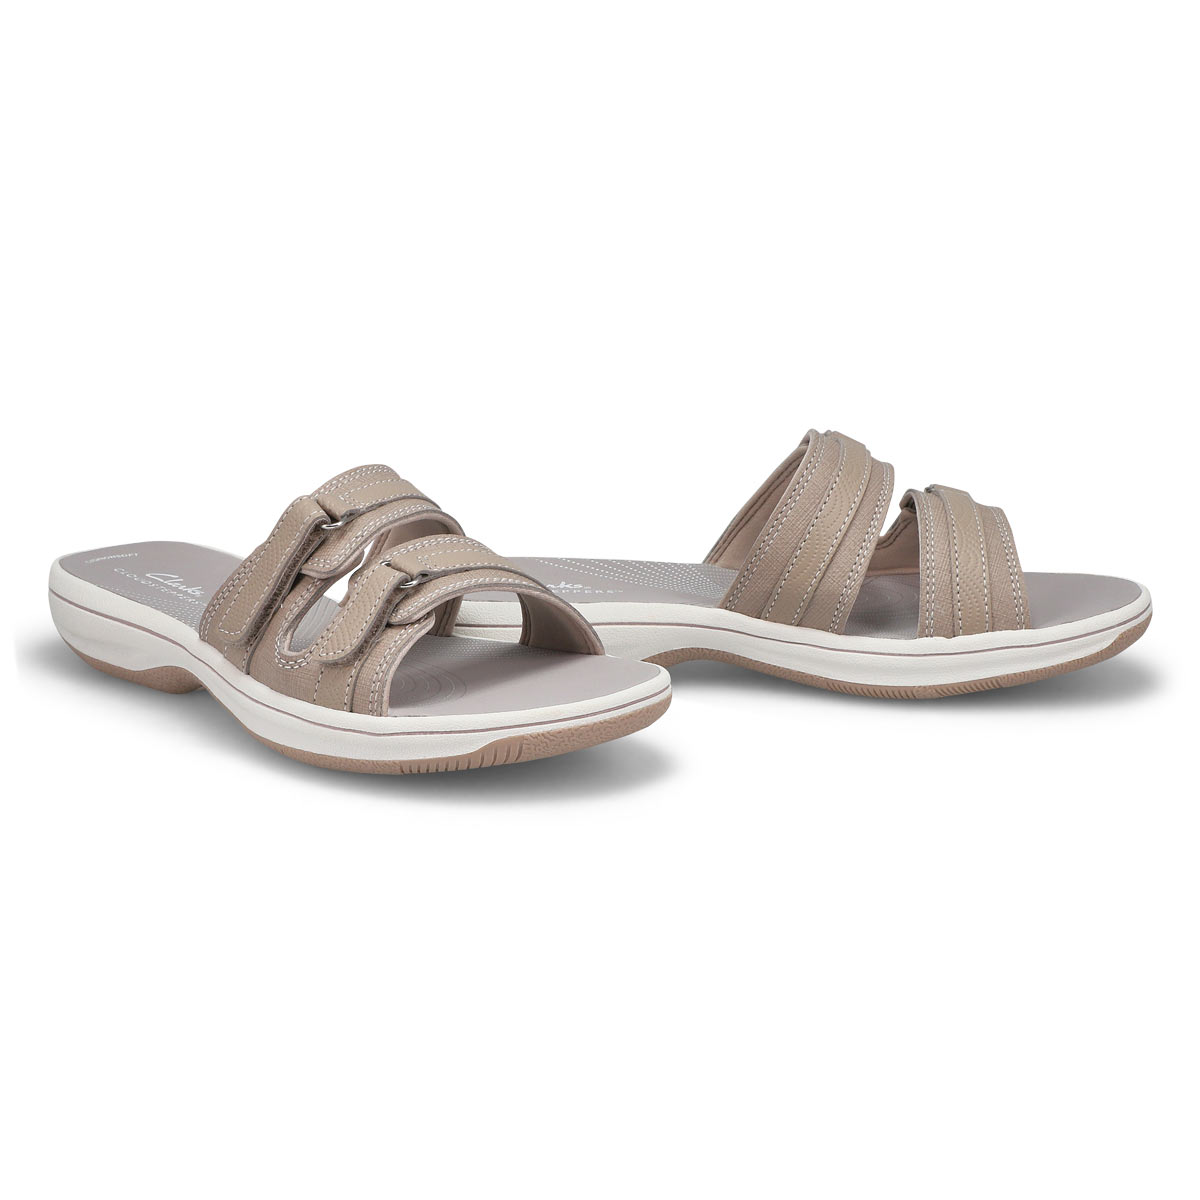 Womens Breeze Piper Casual Sandal - Light Taupe